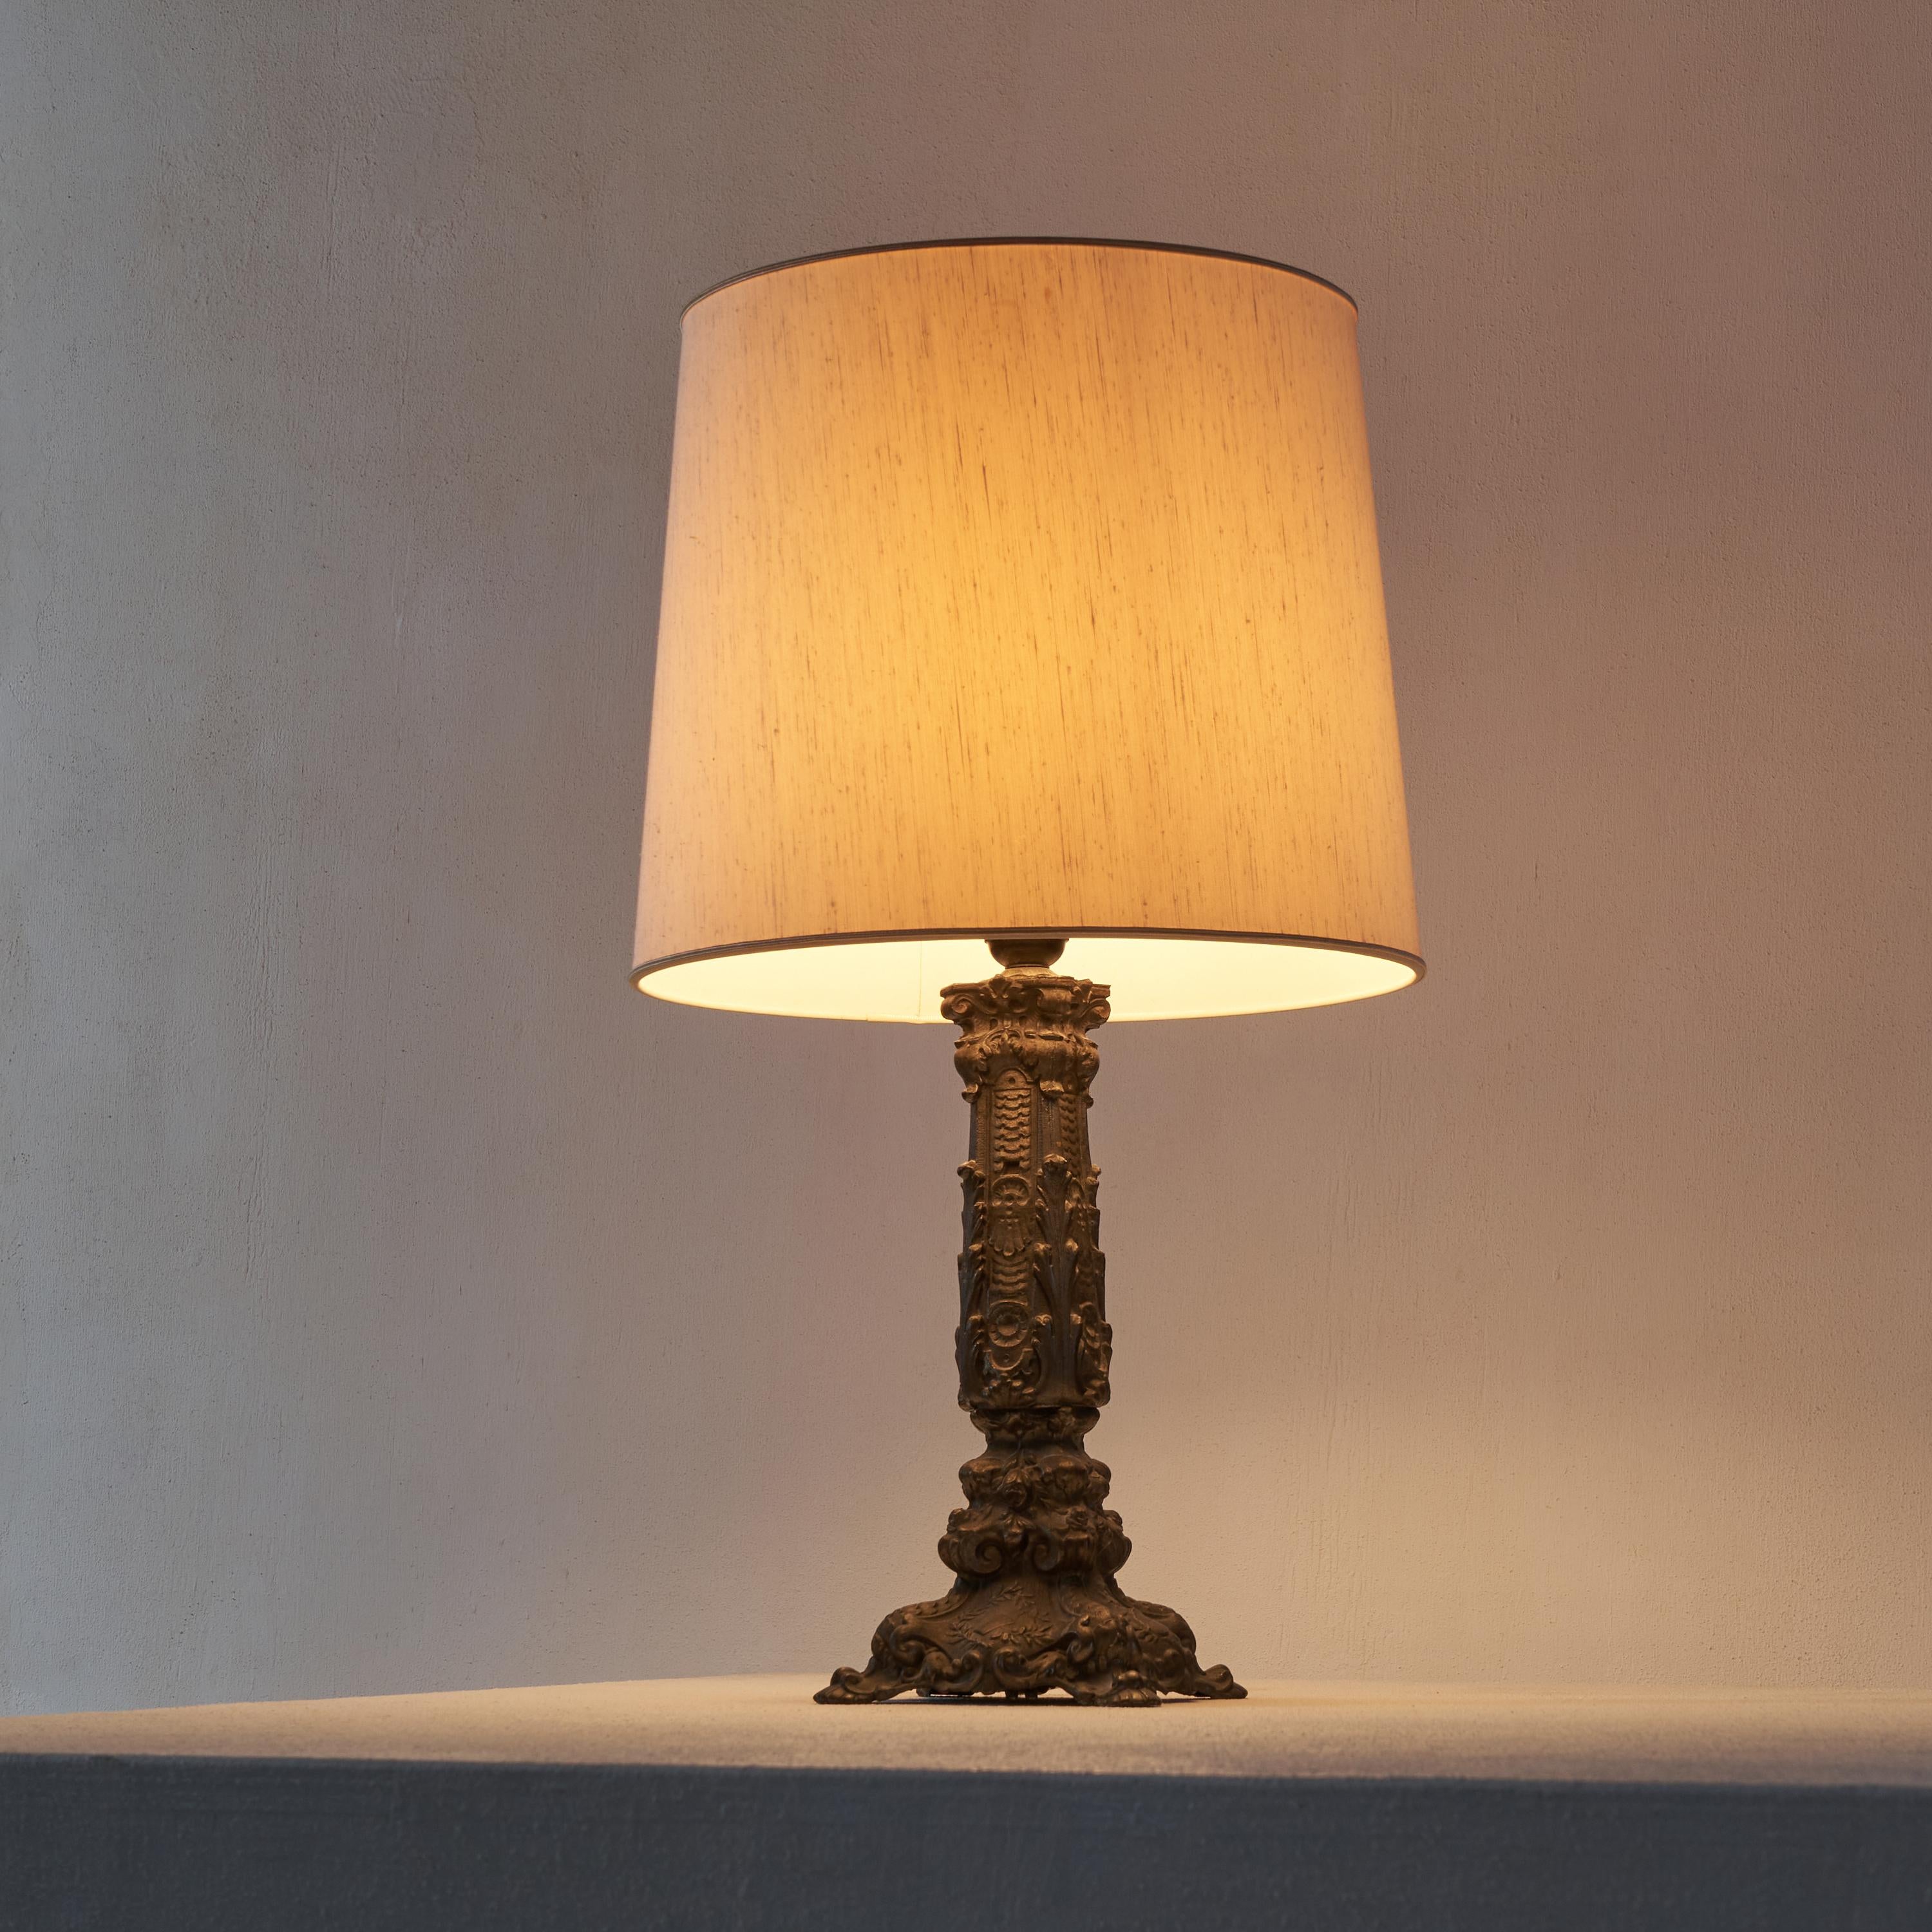 Hand-Crafted Elegant Antique Table Lamp in Bronze, 1900 For Sale